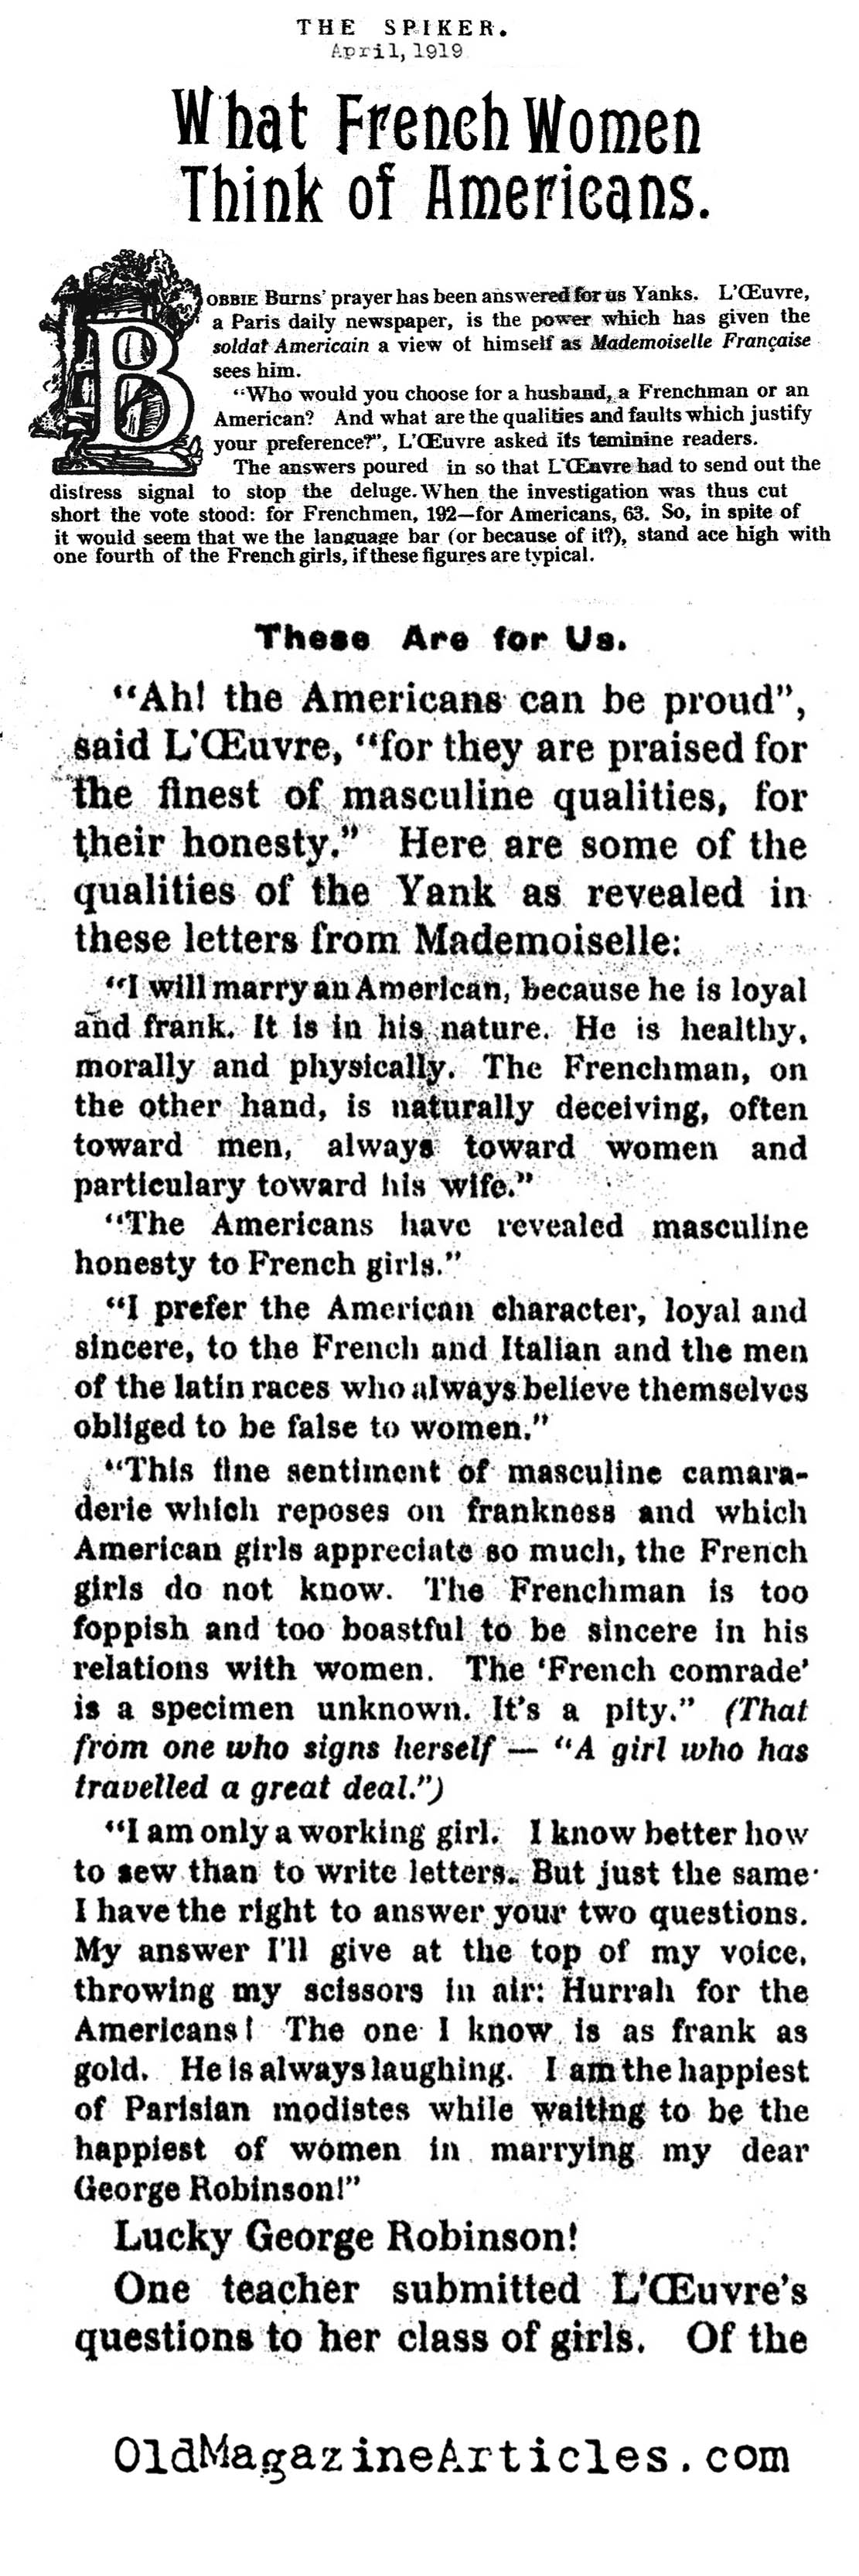 French Women and American Soldiers   (The Spiker, 1919)